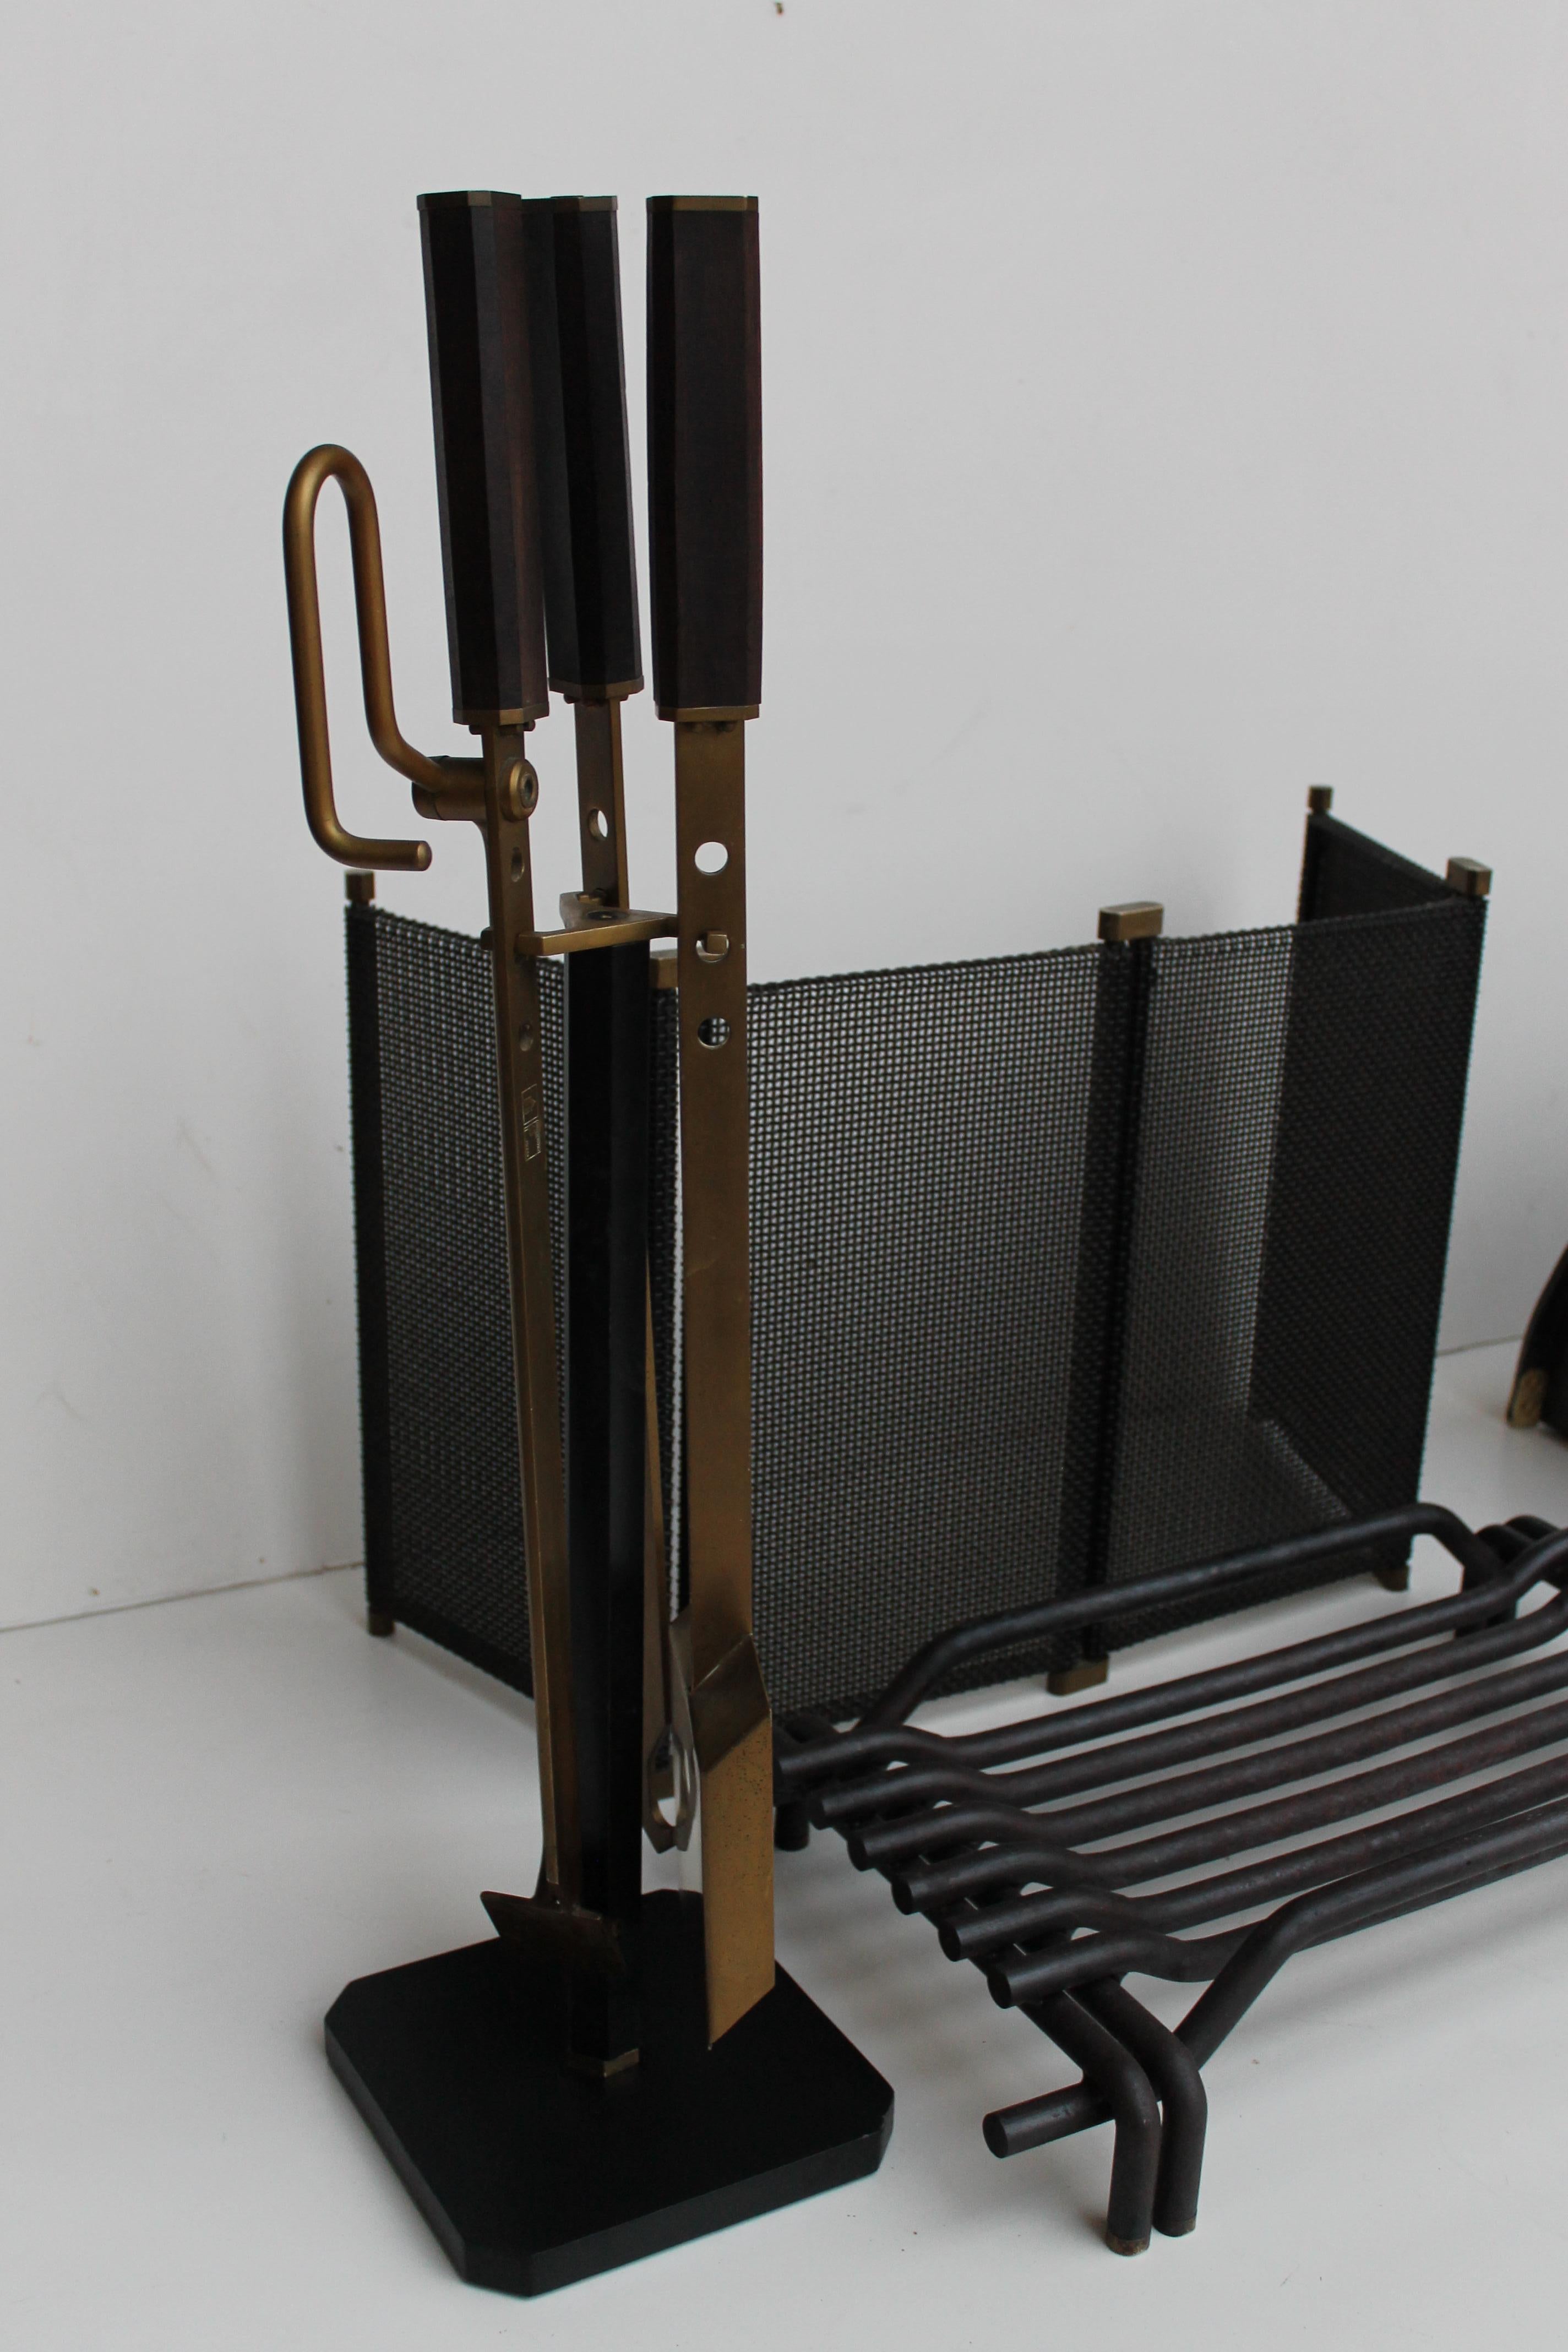 Iron Mid Century Italian Fireplace Set by Tobia Scarpa for Dimensione Fuoco, 1983